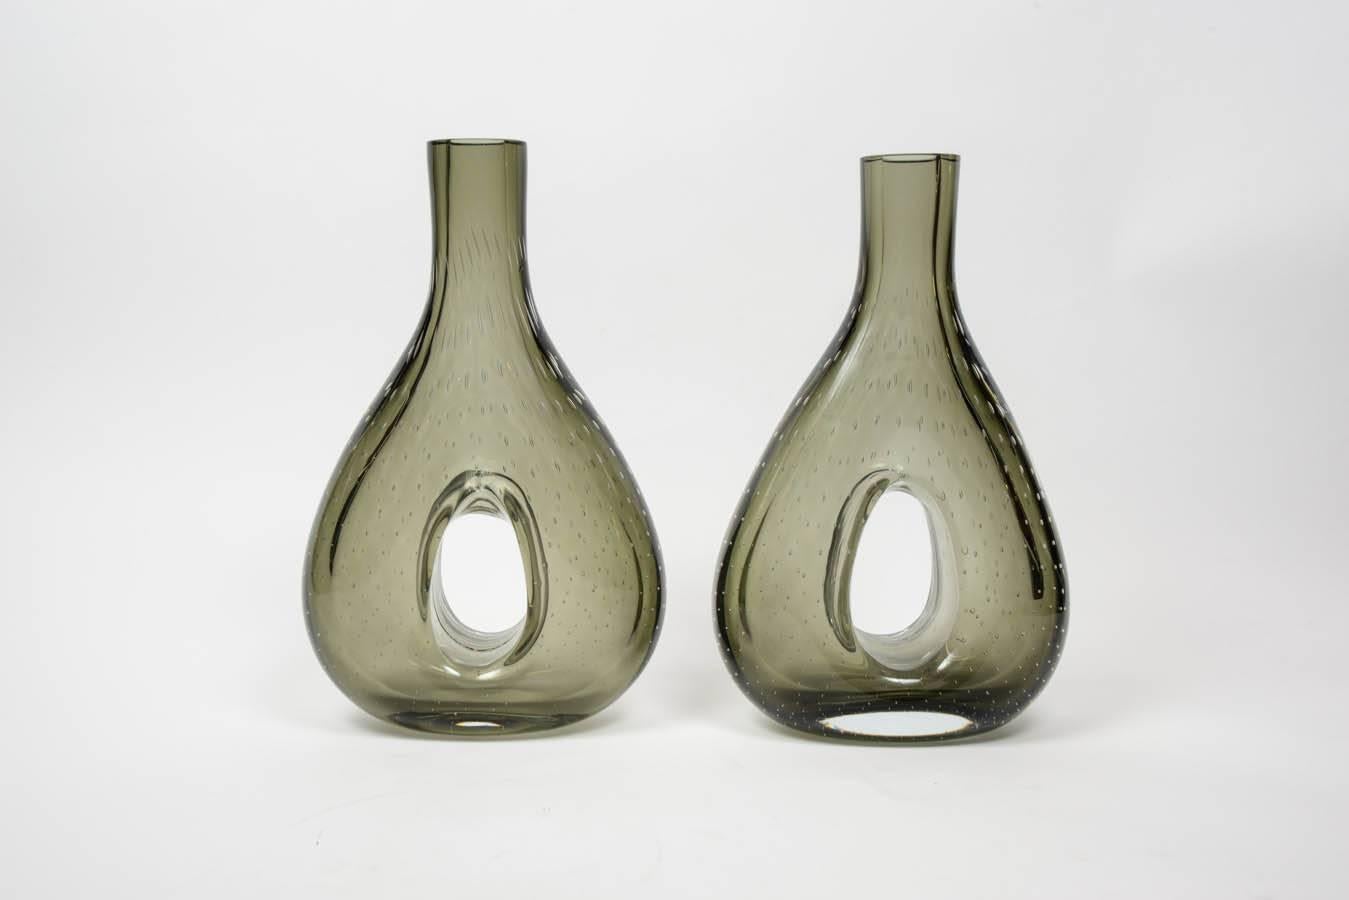 Pair of atypical shaped vases, made in smoked Murano glass. 

Interesting details are the air bubble inside the glass creating an all-over pattern.